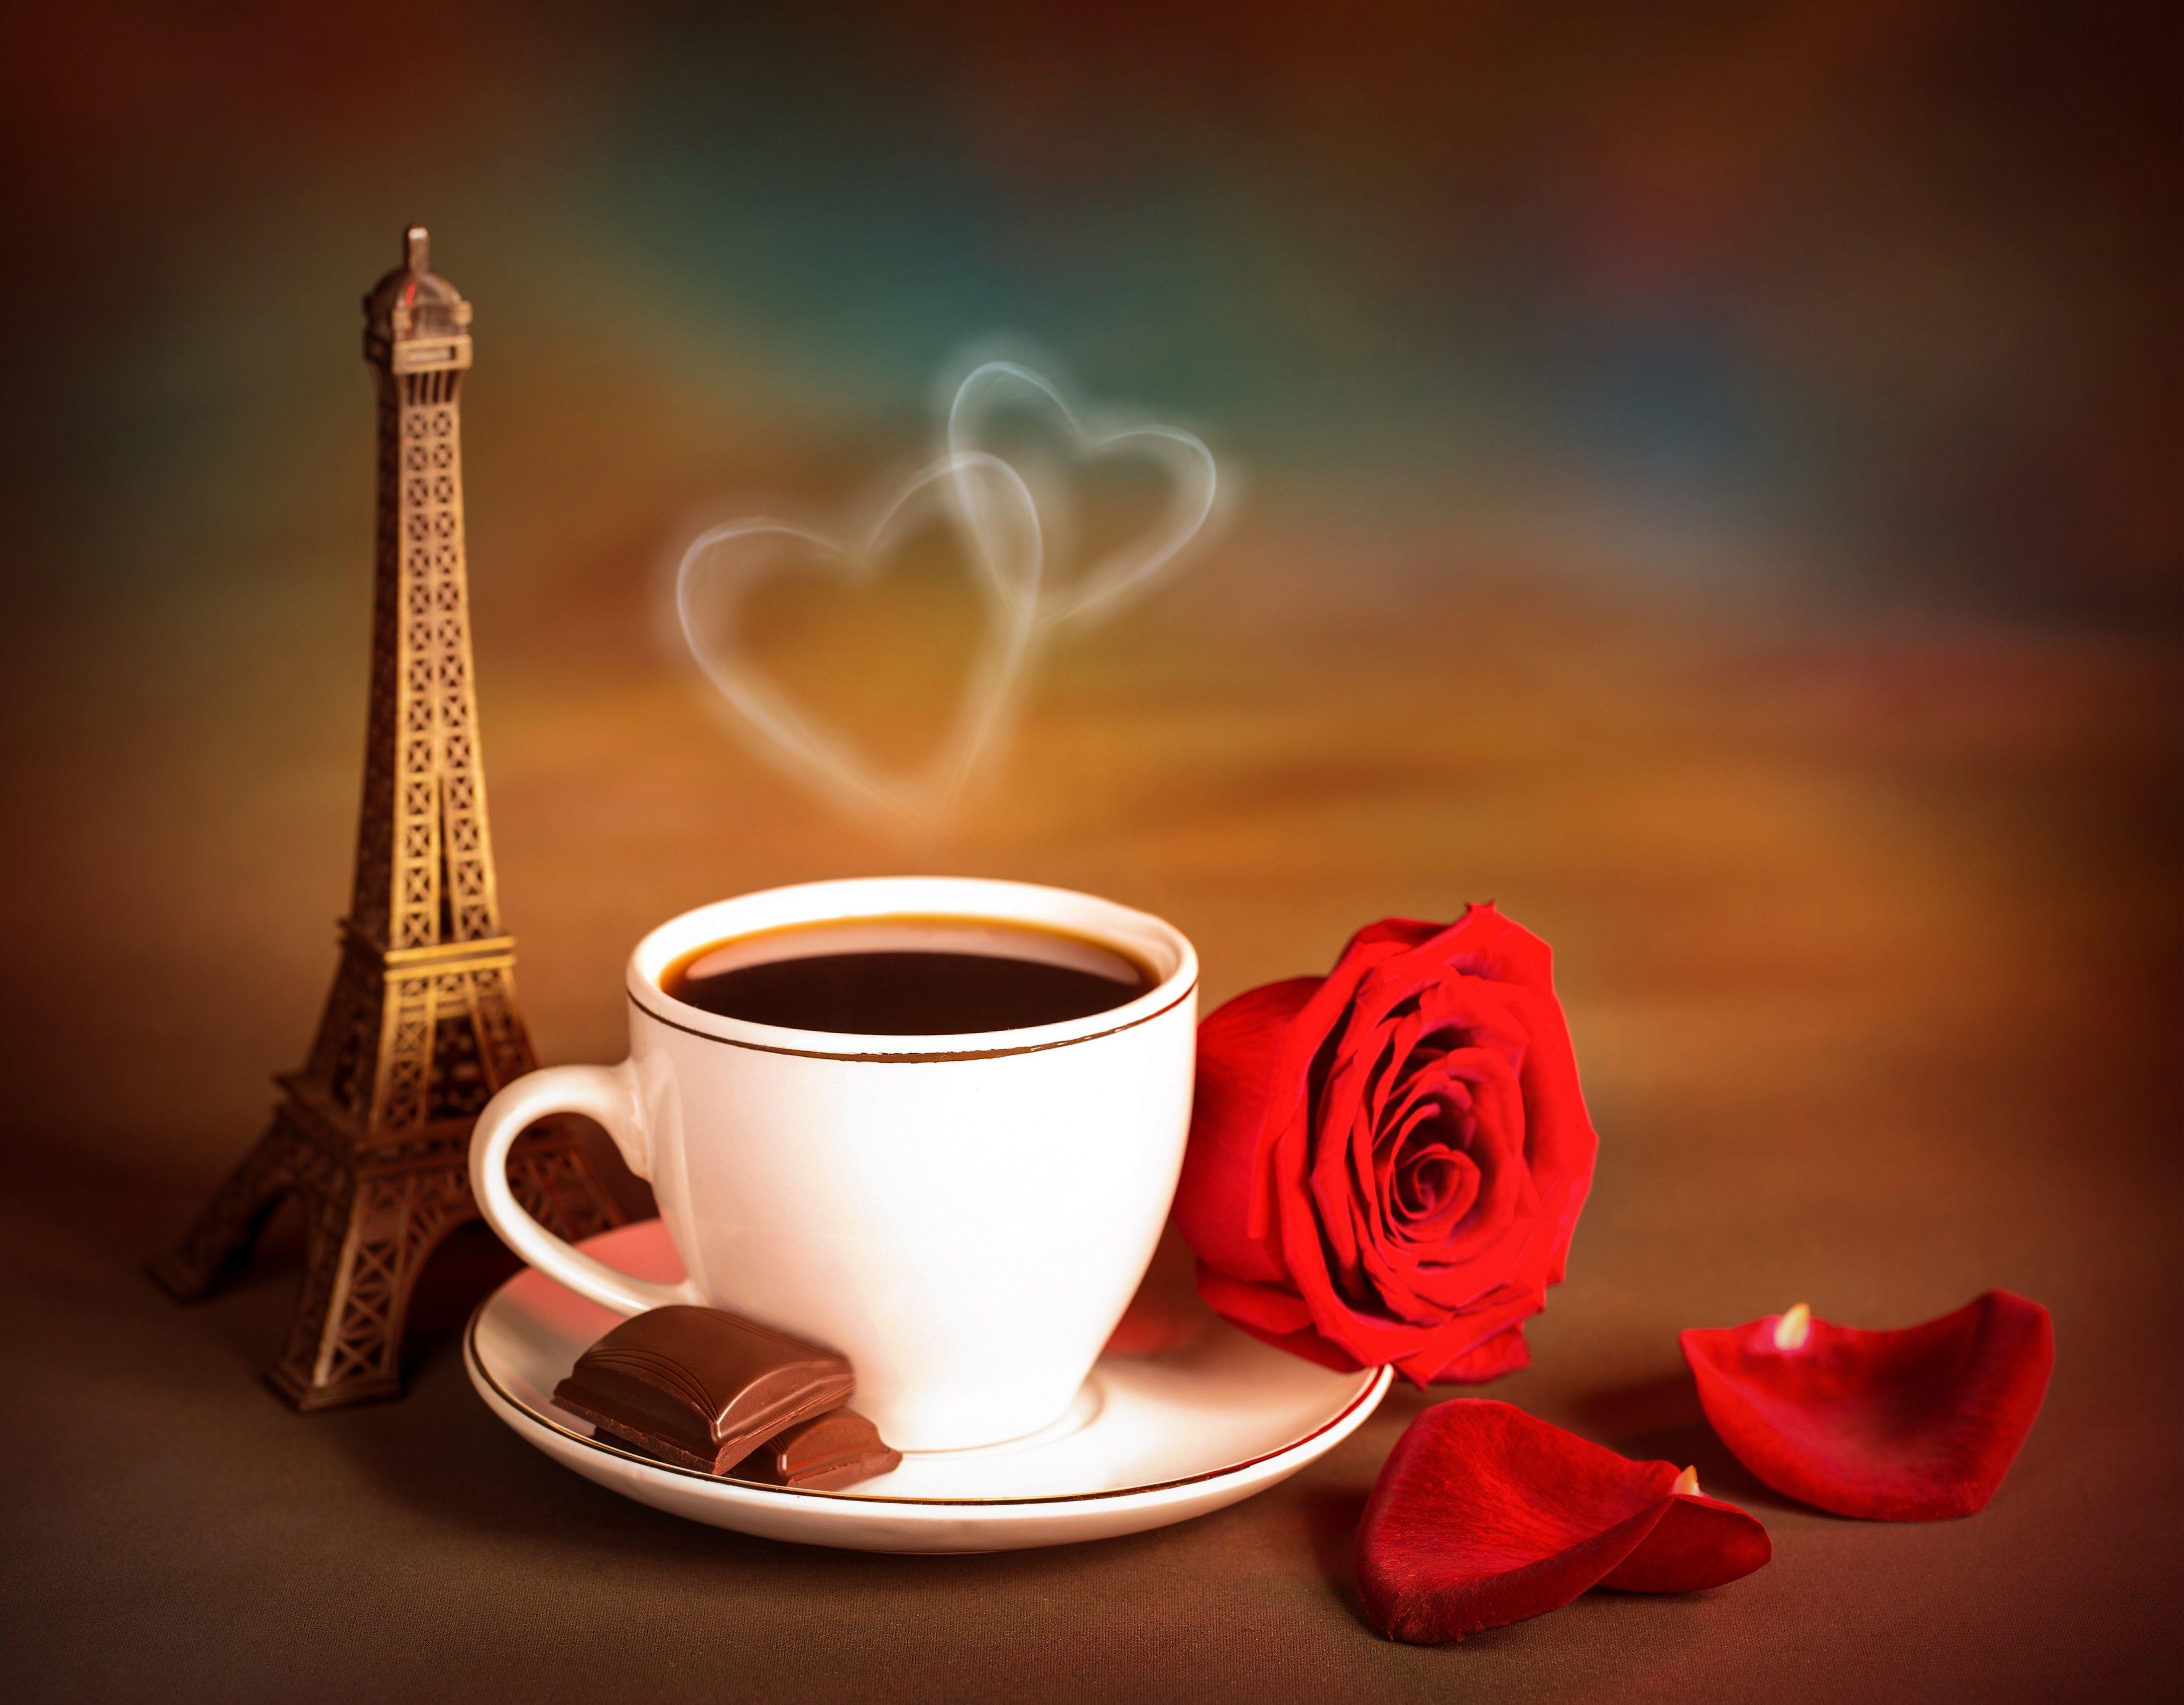 Flower: Flowers Roses Petals Valentines Day Eiffel Tower Cup